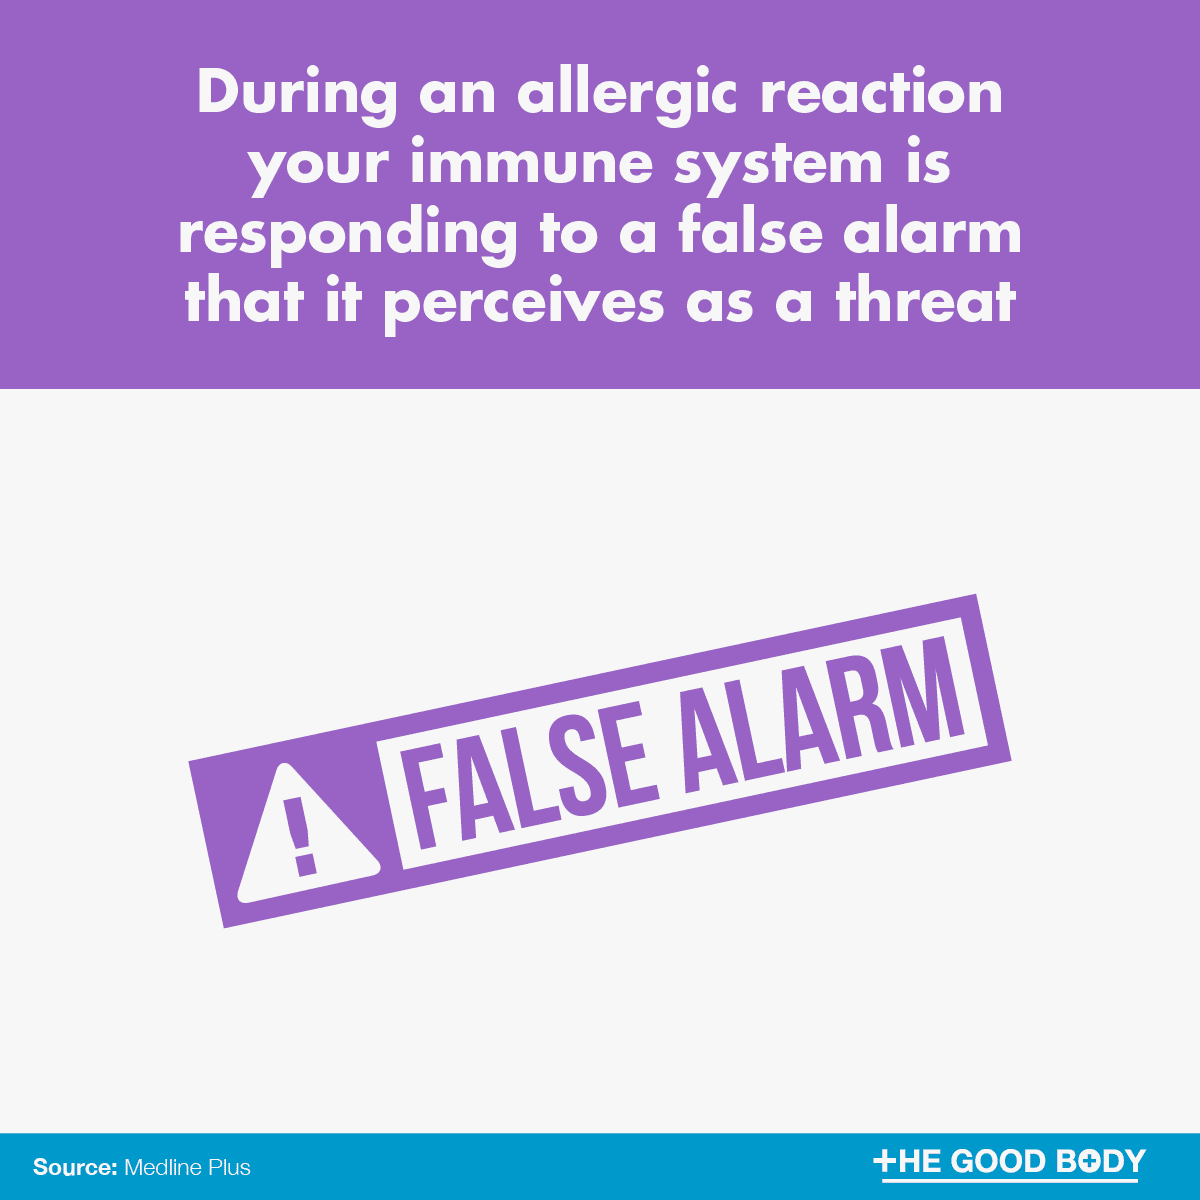 During an allergic reaction your immune system is responding to a false alarm that it perceives as a threat